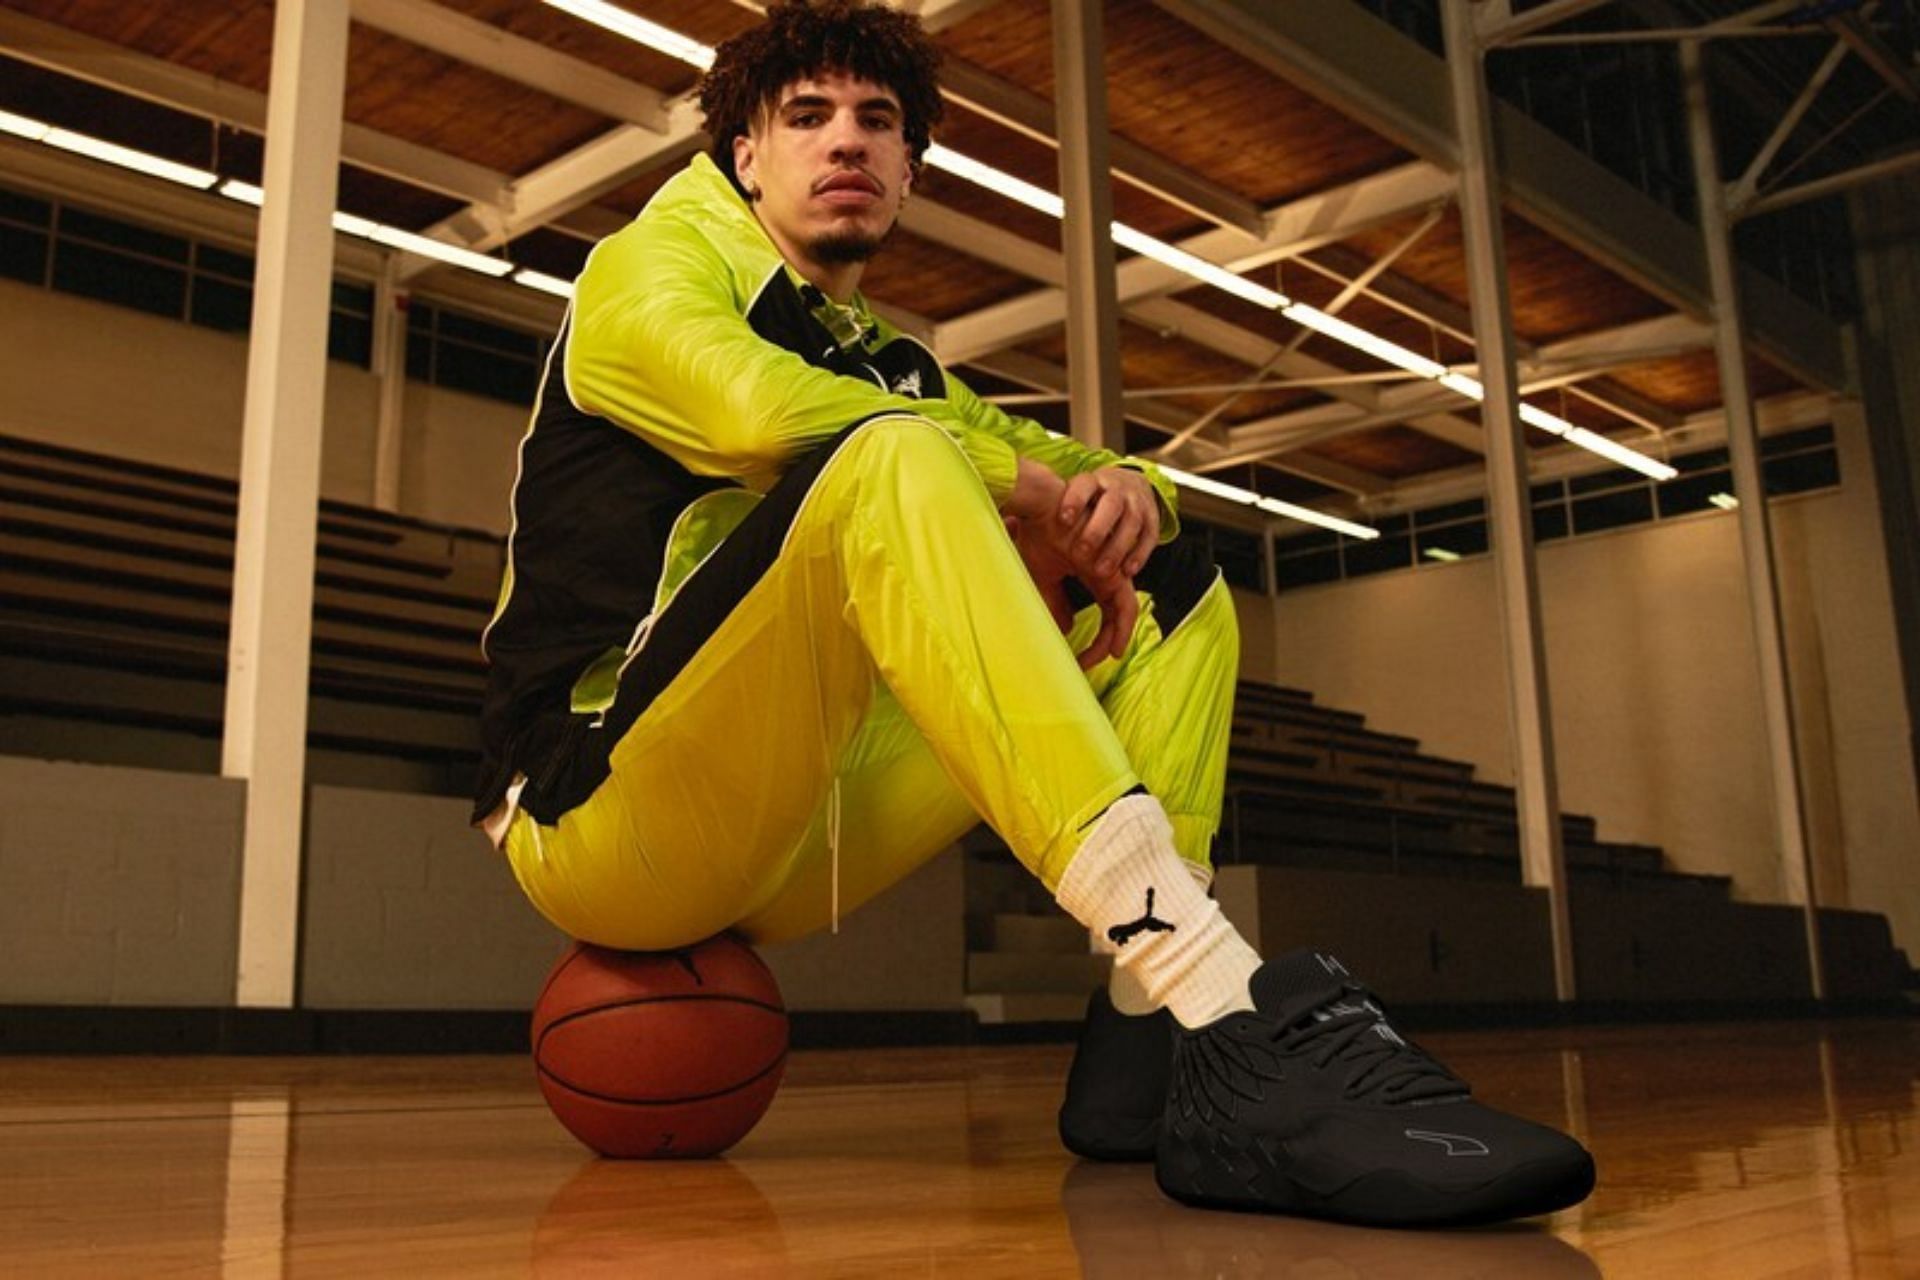 LaMelo Ball PUMA Shoes - Where to Buy & Release Info